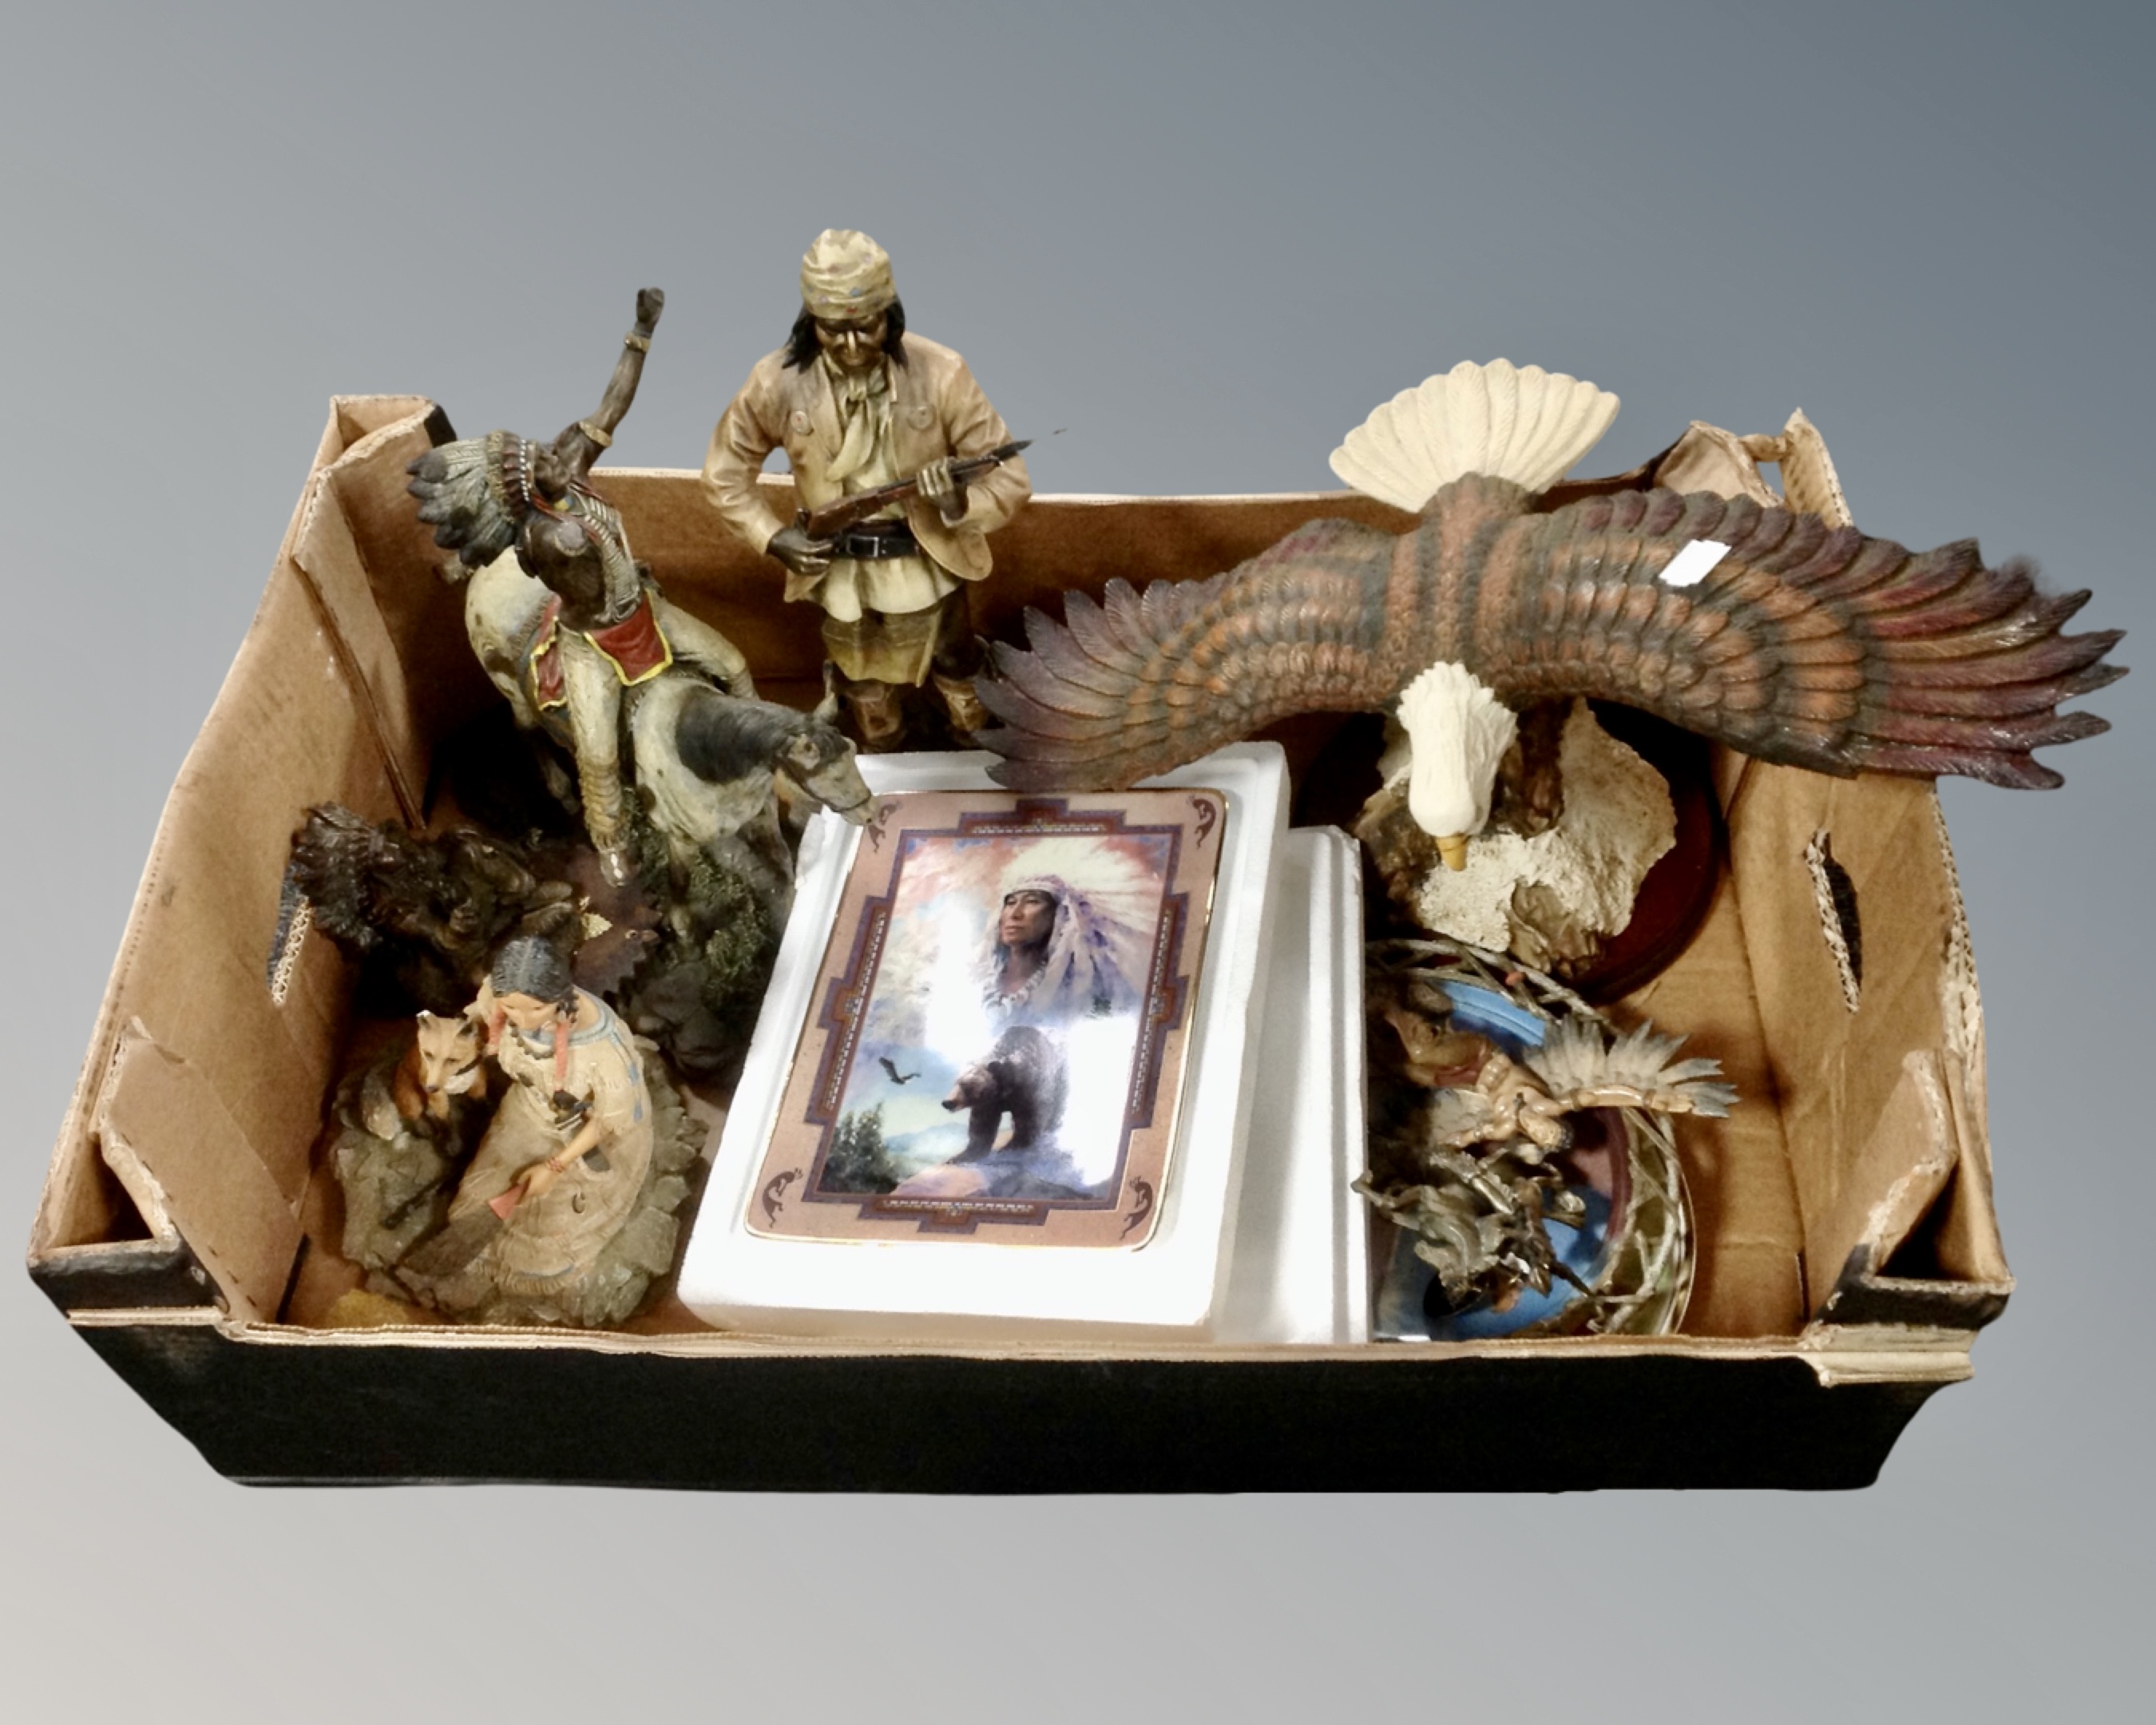 A box containing Native American figurines and wall plates.